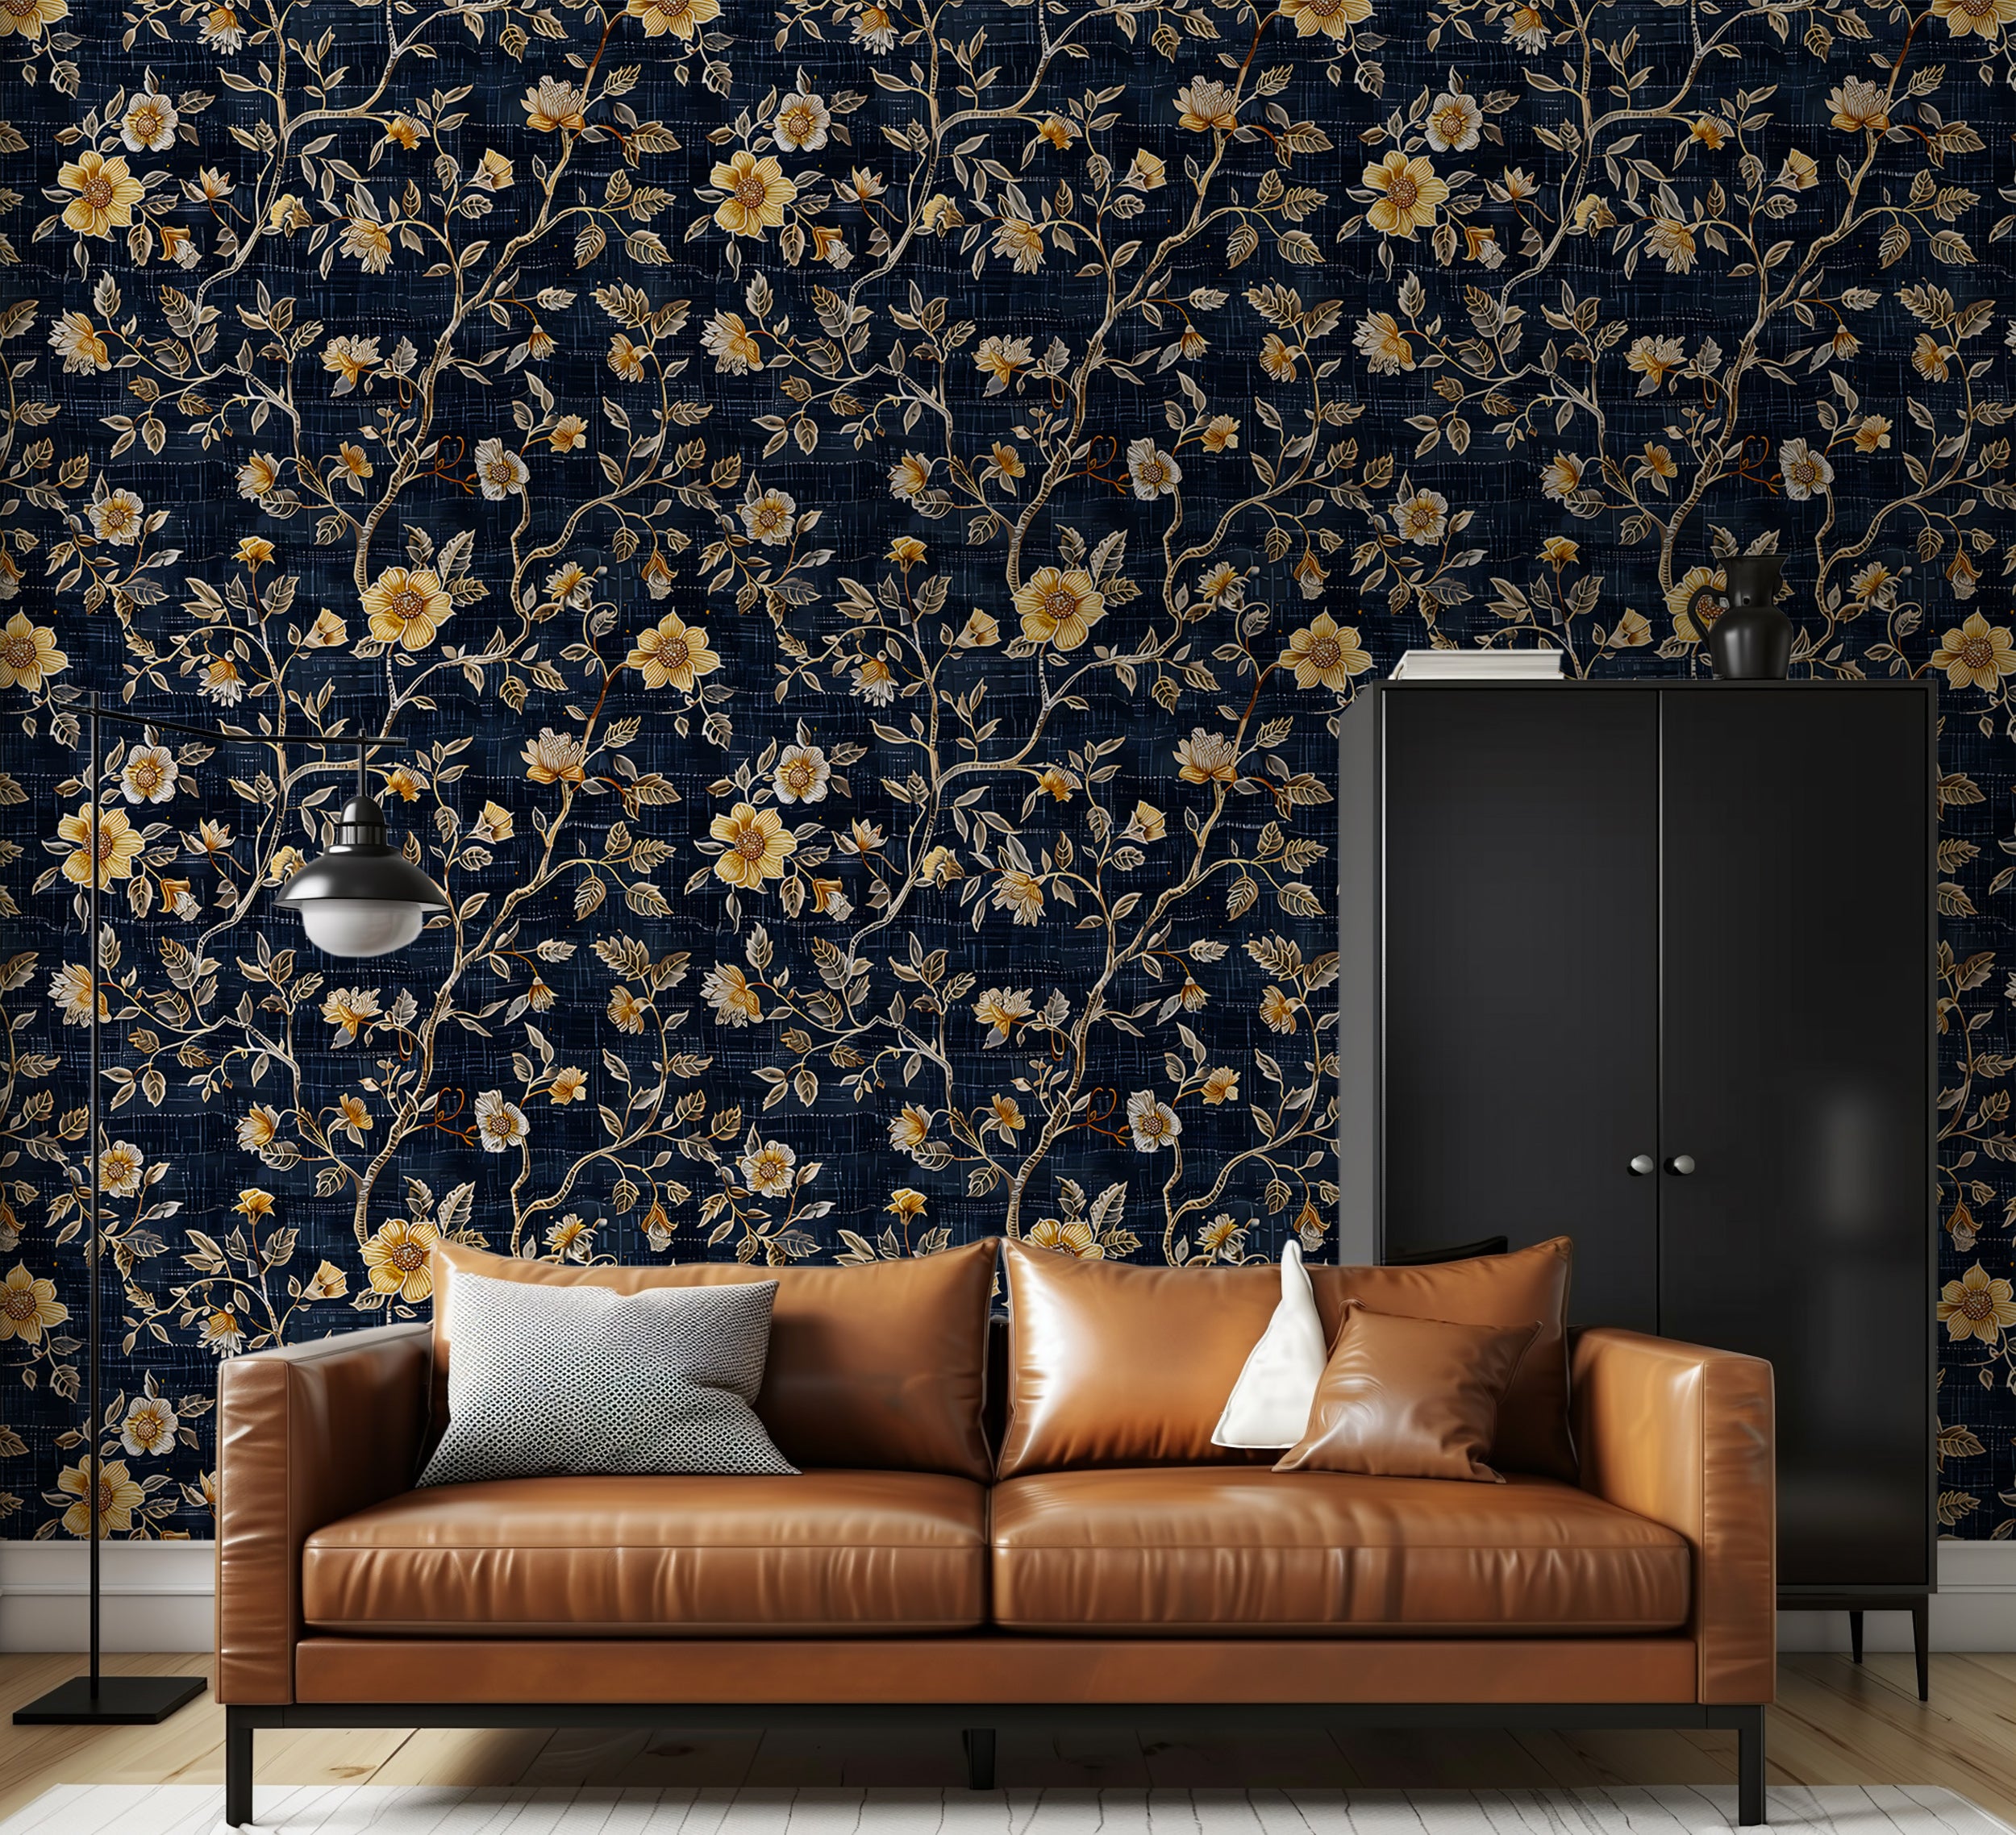 Dark floral accent wall